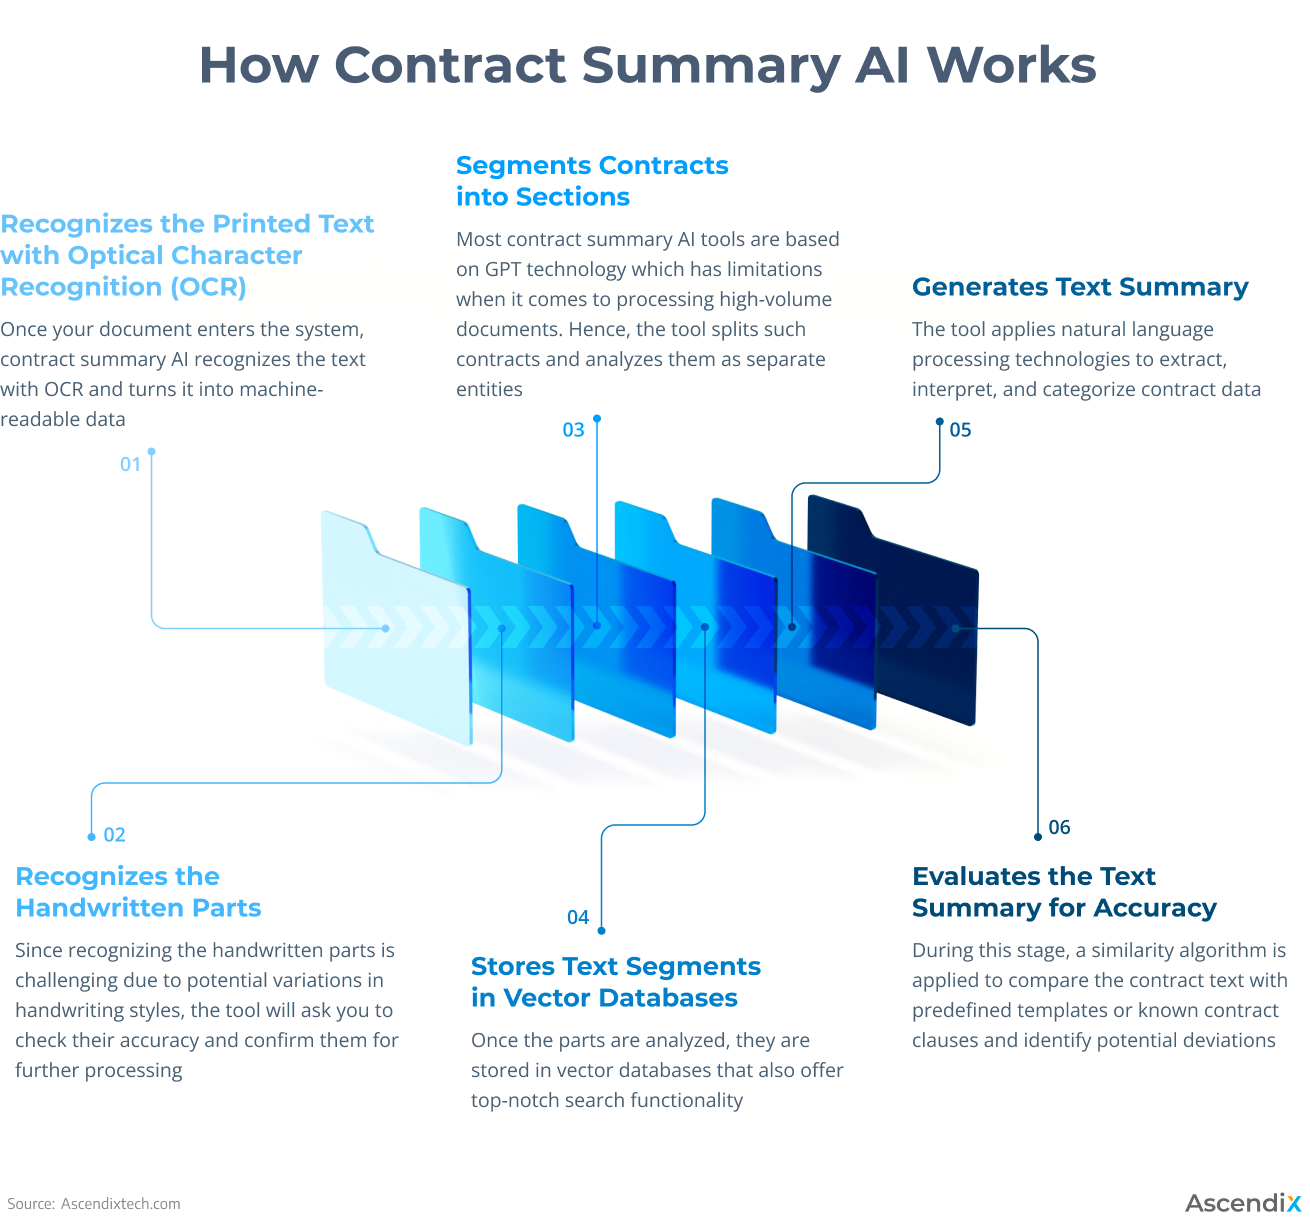 03_How Contract Summary AI Works